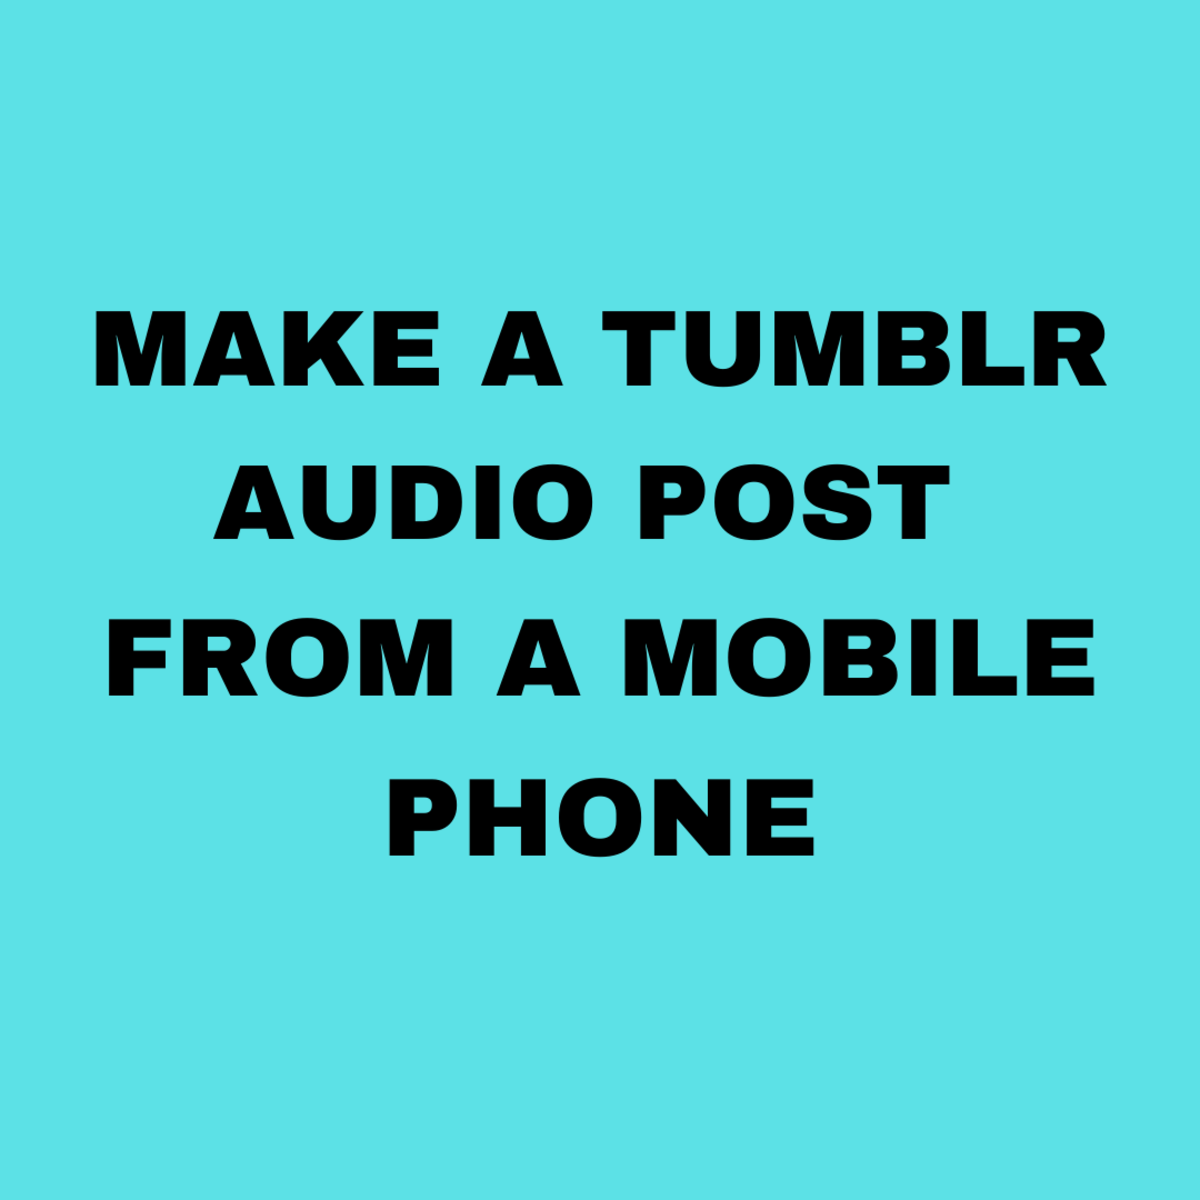 How to Make a Tumblr Audio Post from a Mobile Phone